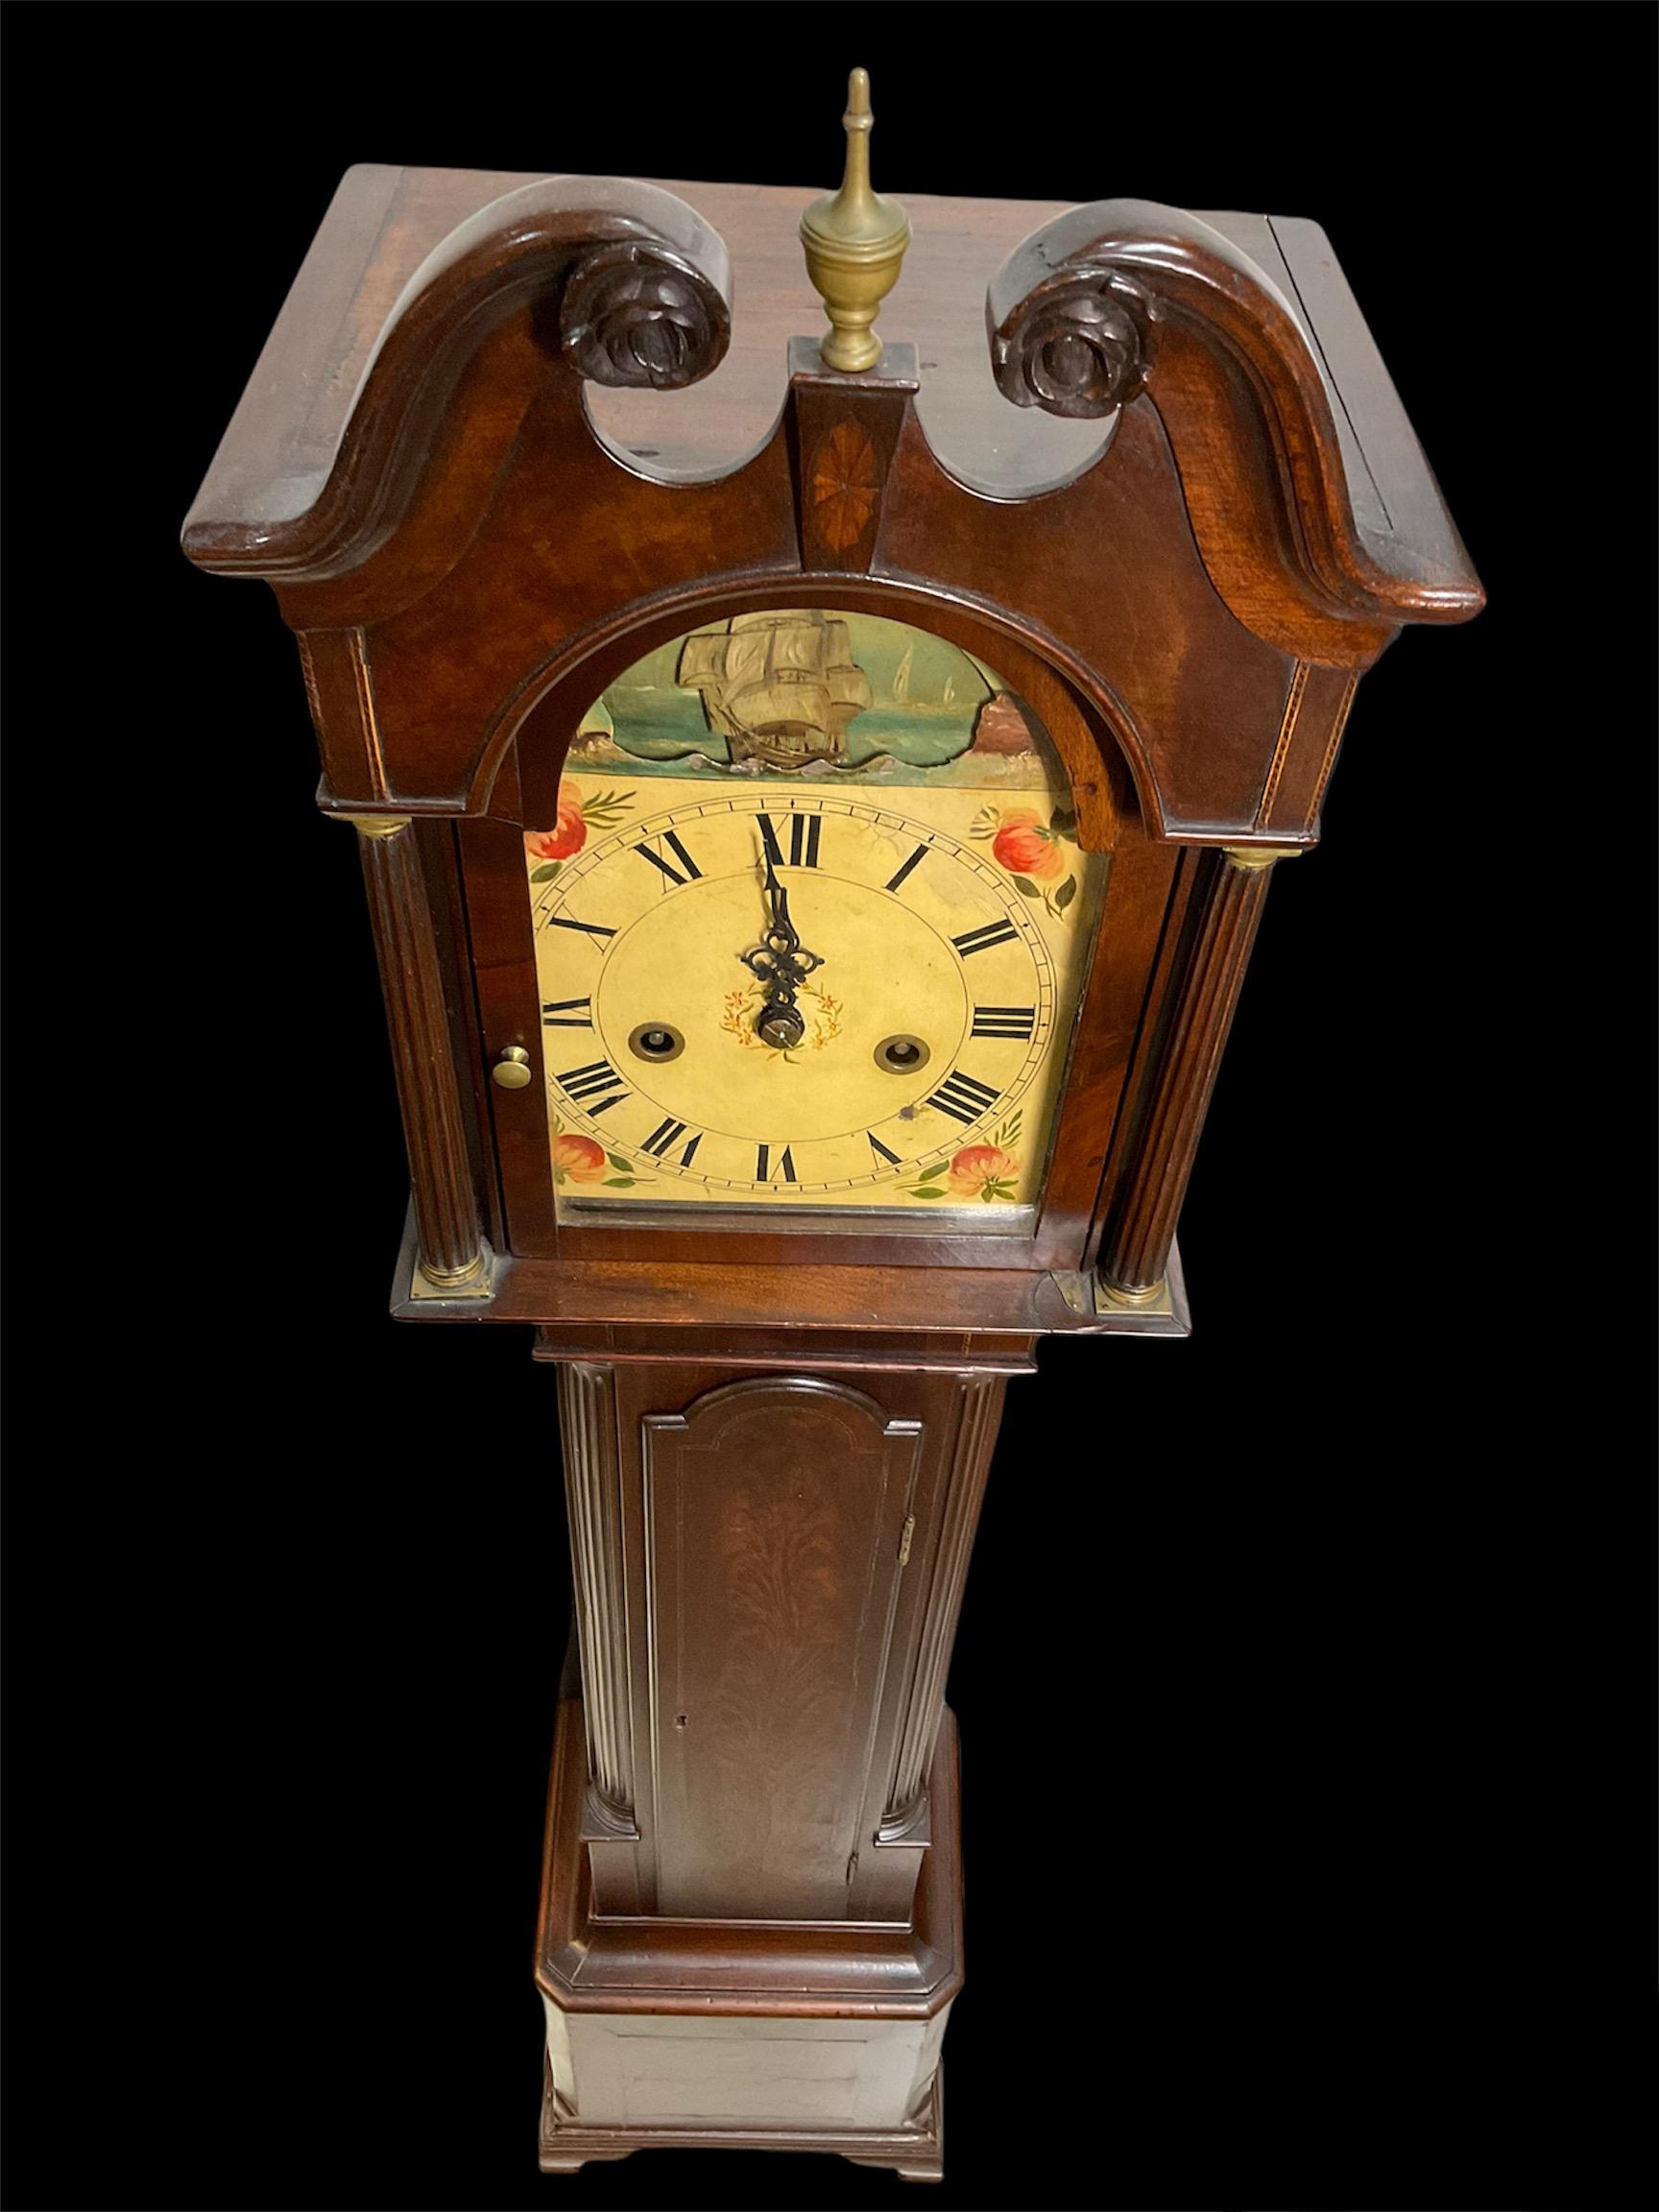 This is a long case Dwarf wood clock. Its bonnet is decorated with a swan neck pediment at the top and an a bronze urn shaped finial. Below the finial, there is an inlaid paterae. The front of the bonnet is also embellished by reeded columns with